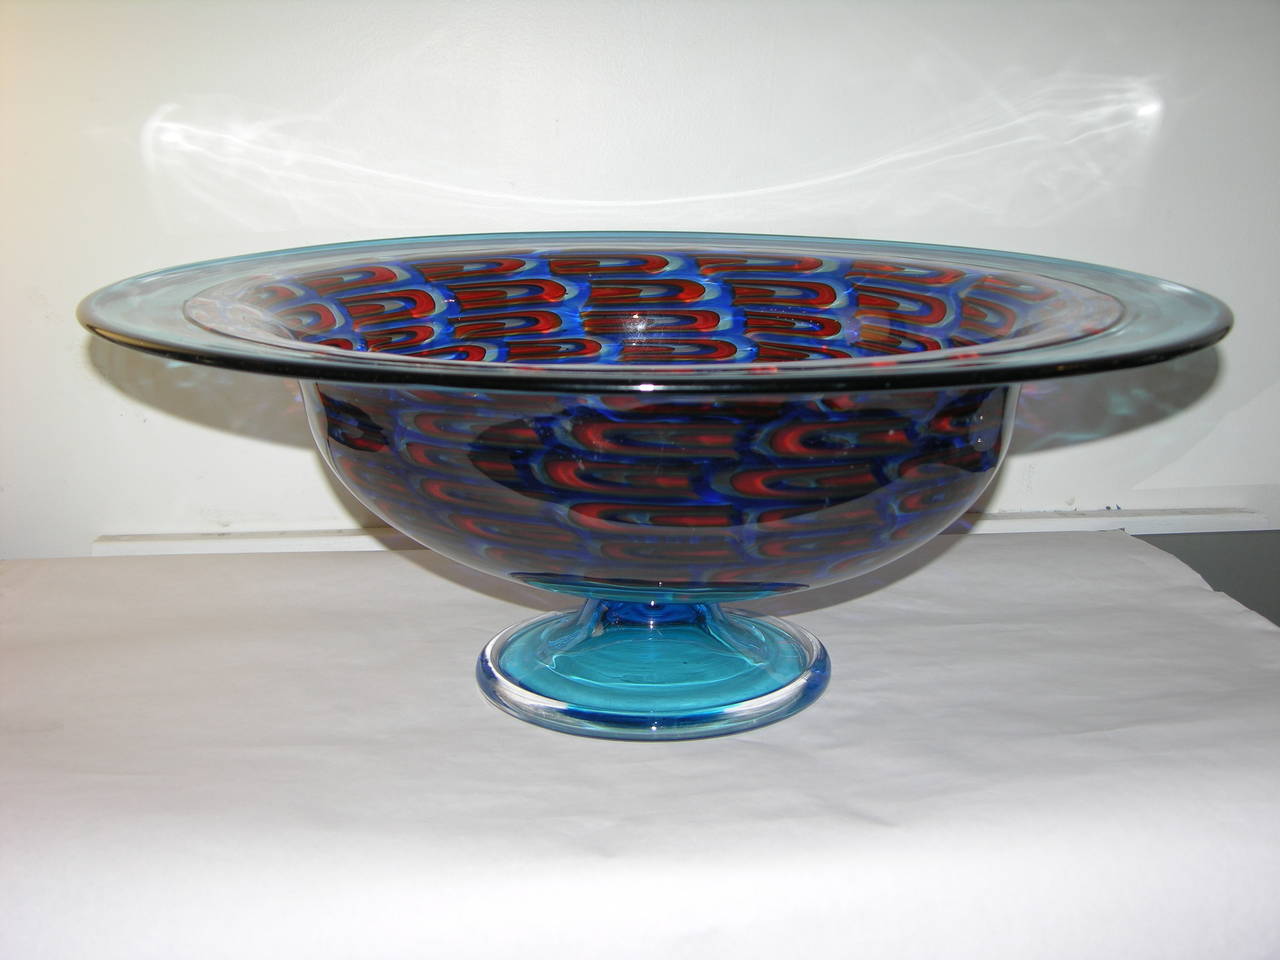 A collector piece, superb and precious work of art, this grand center bowl in mouth blown Murano glass is decorated with Murrine in crimson and turquoise, with a wide turquoise border worked 